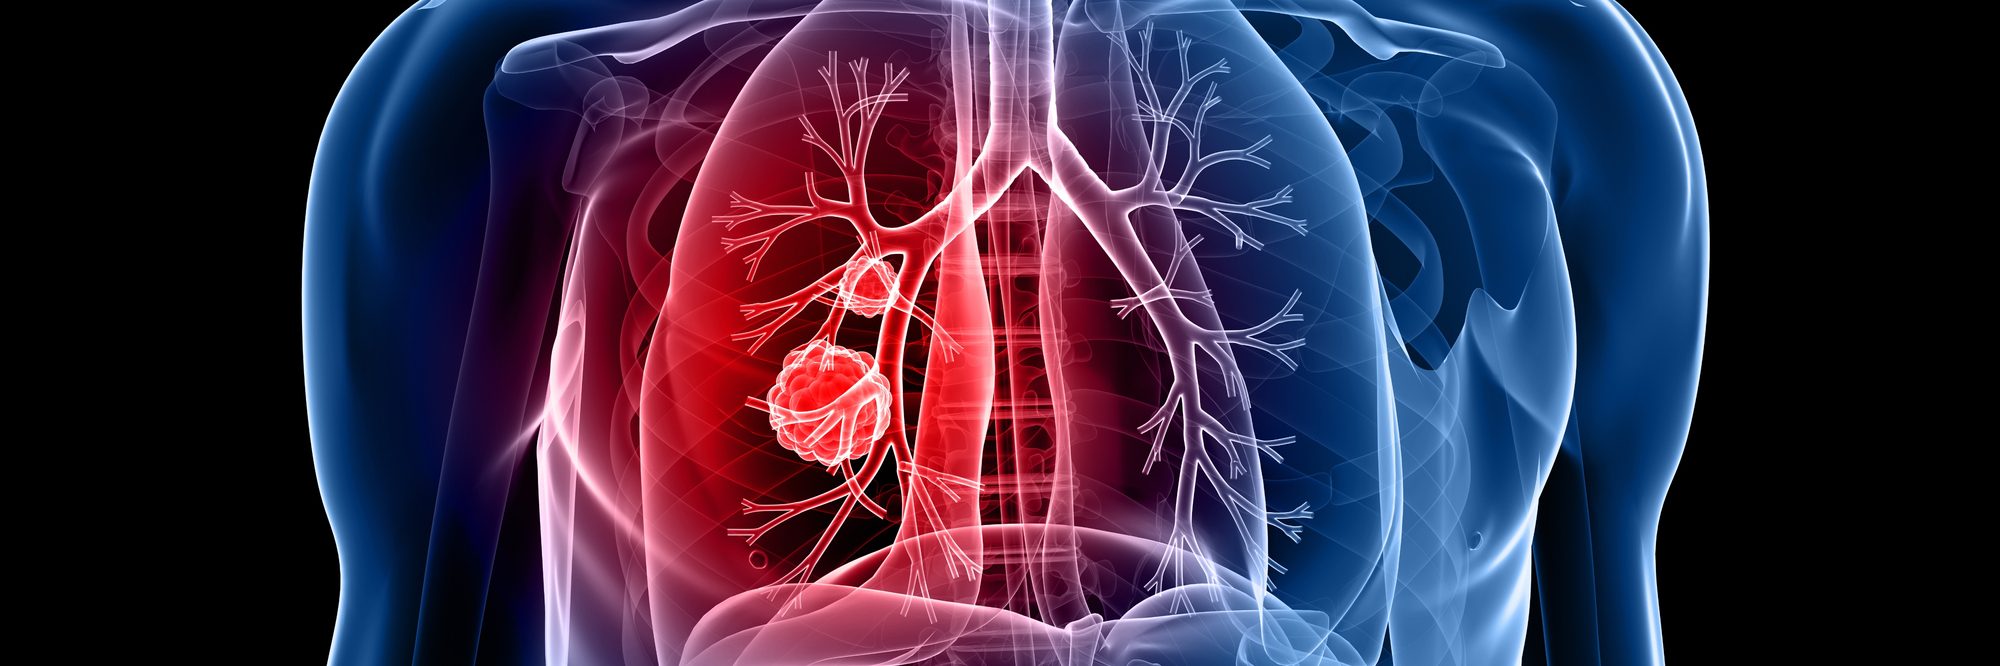 Challenges Involved in Managing Older Patients With GPA at Risk of Developing Lung Cancer